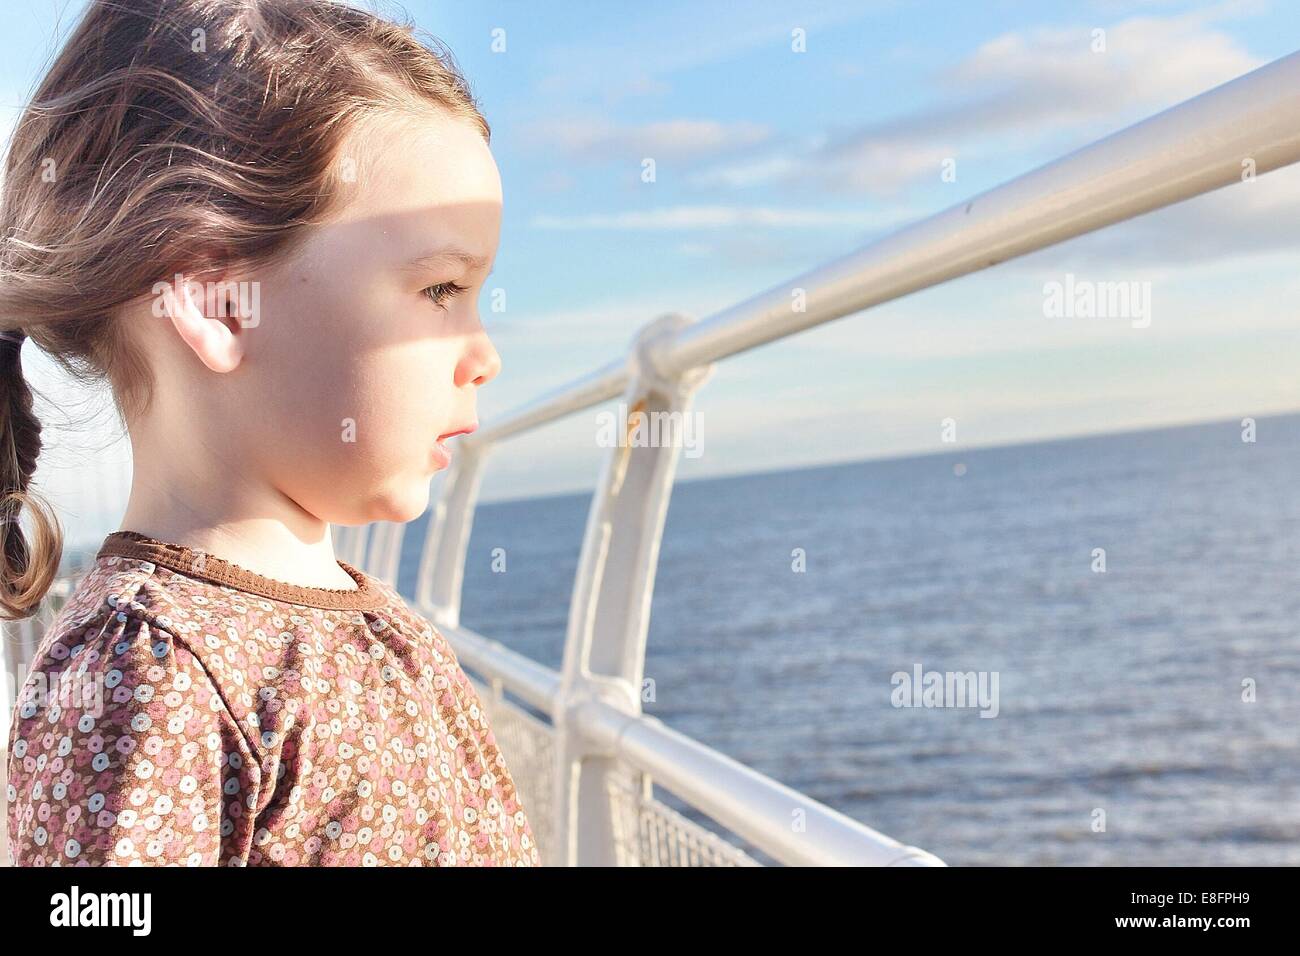 Girl standing on boat looking out to sea Stock Photo